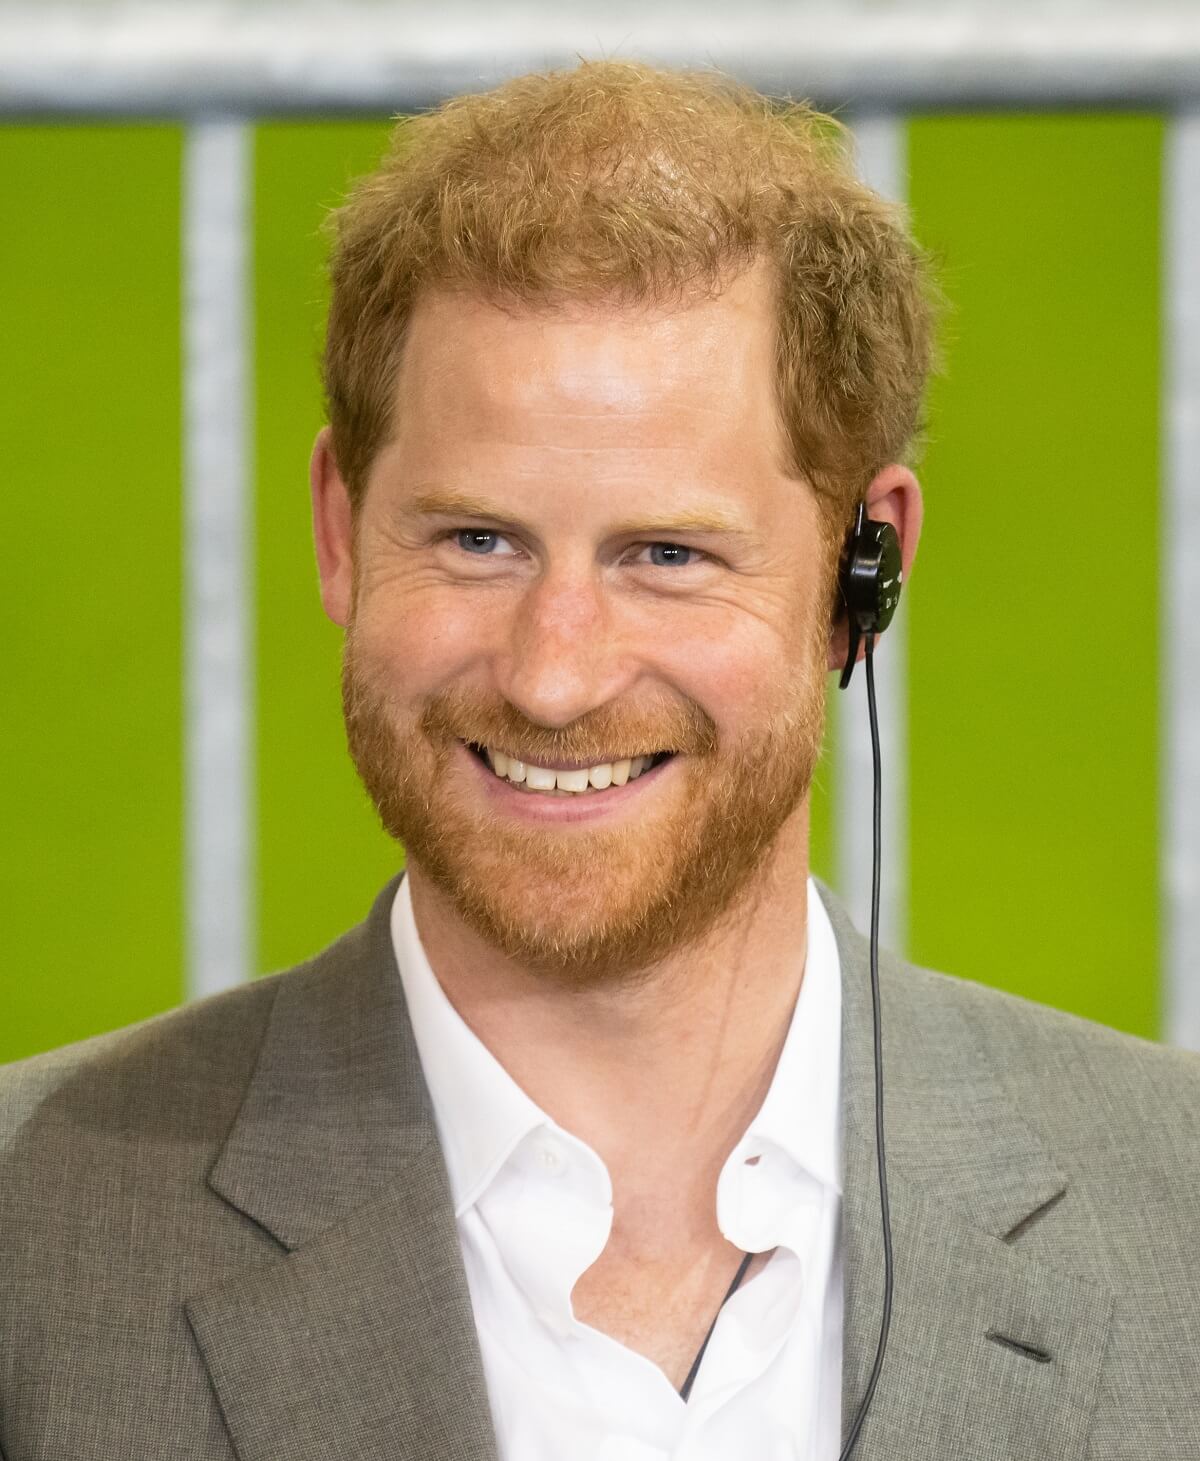 Prince Harry smiling during the Invictus Games Dusseldorf 2023 - One Year To Go launch event